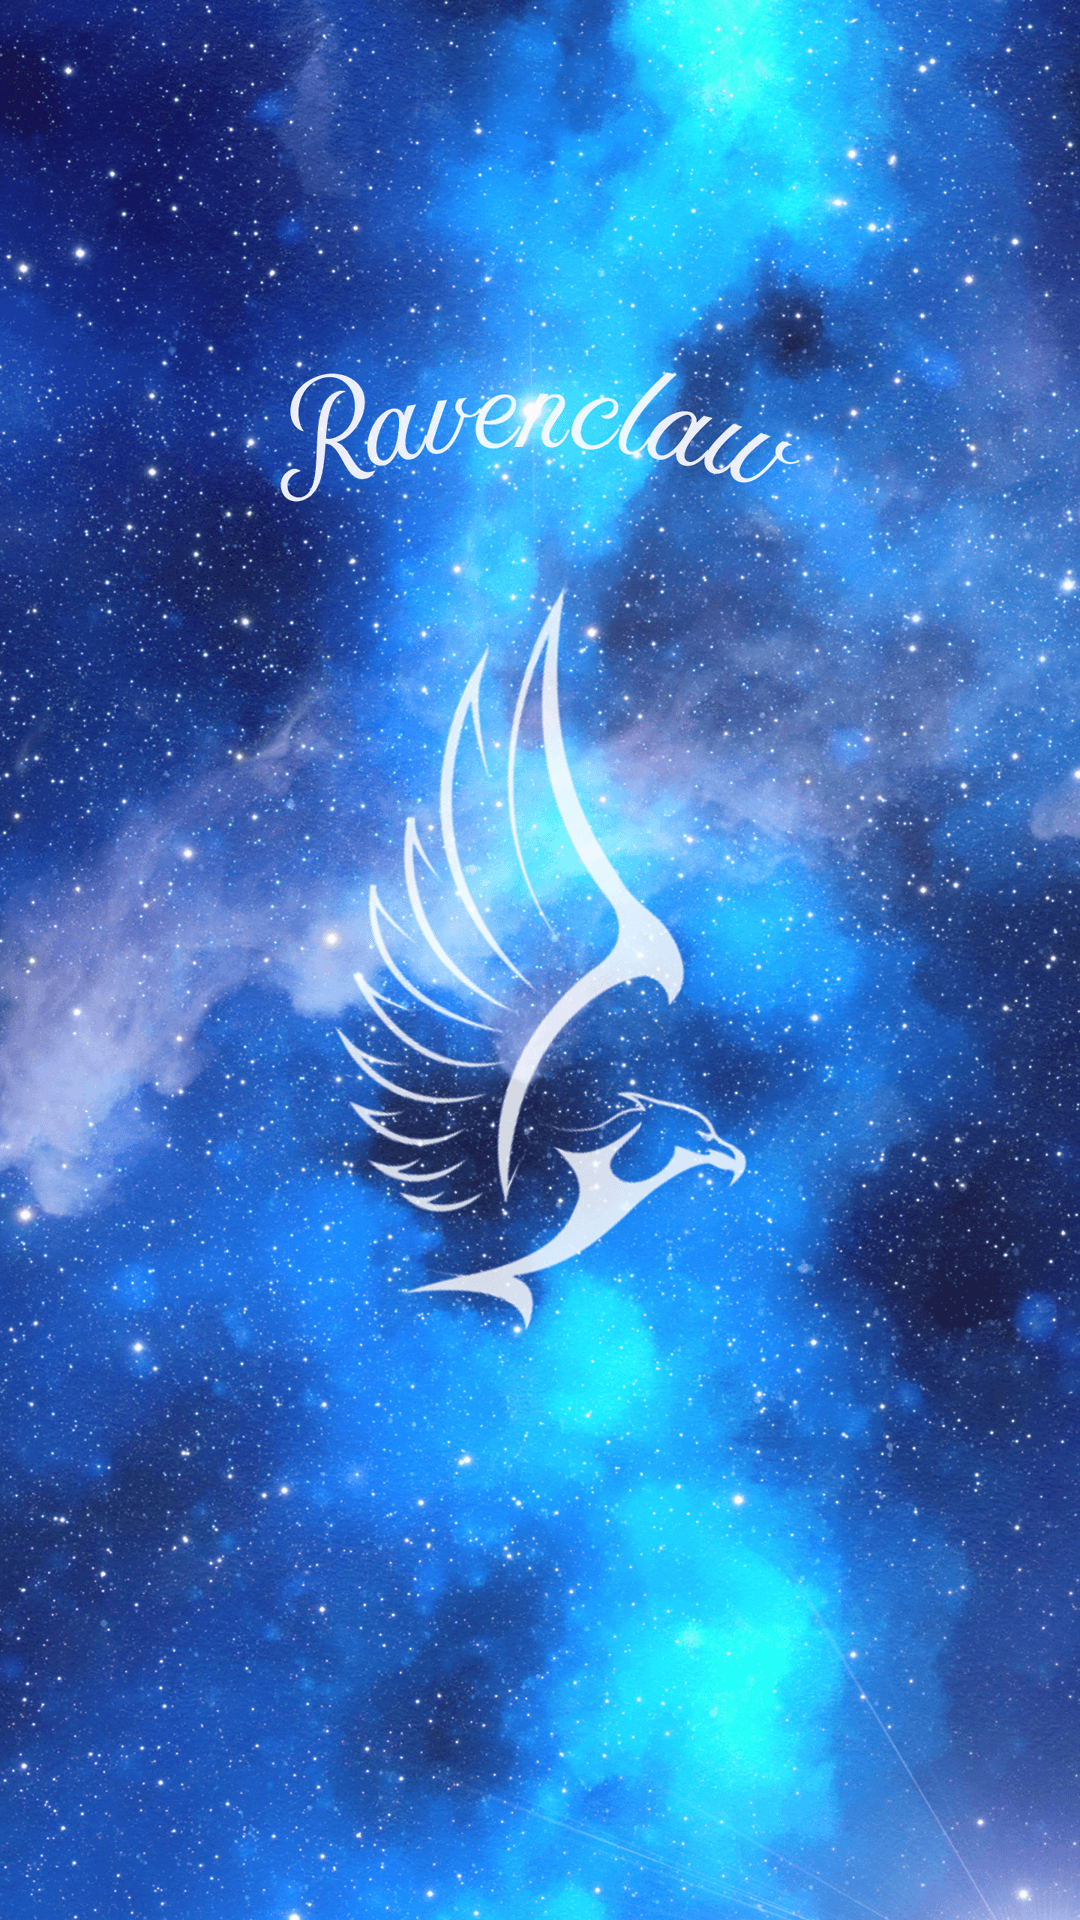 Ravenclaw Wallpaper  Top 30 Free Ravenclaw Backgrounds for iPhone   Ravenclaw Harry potter world Harry potter wallpaper